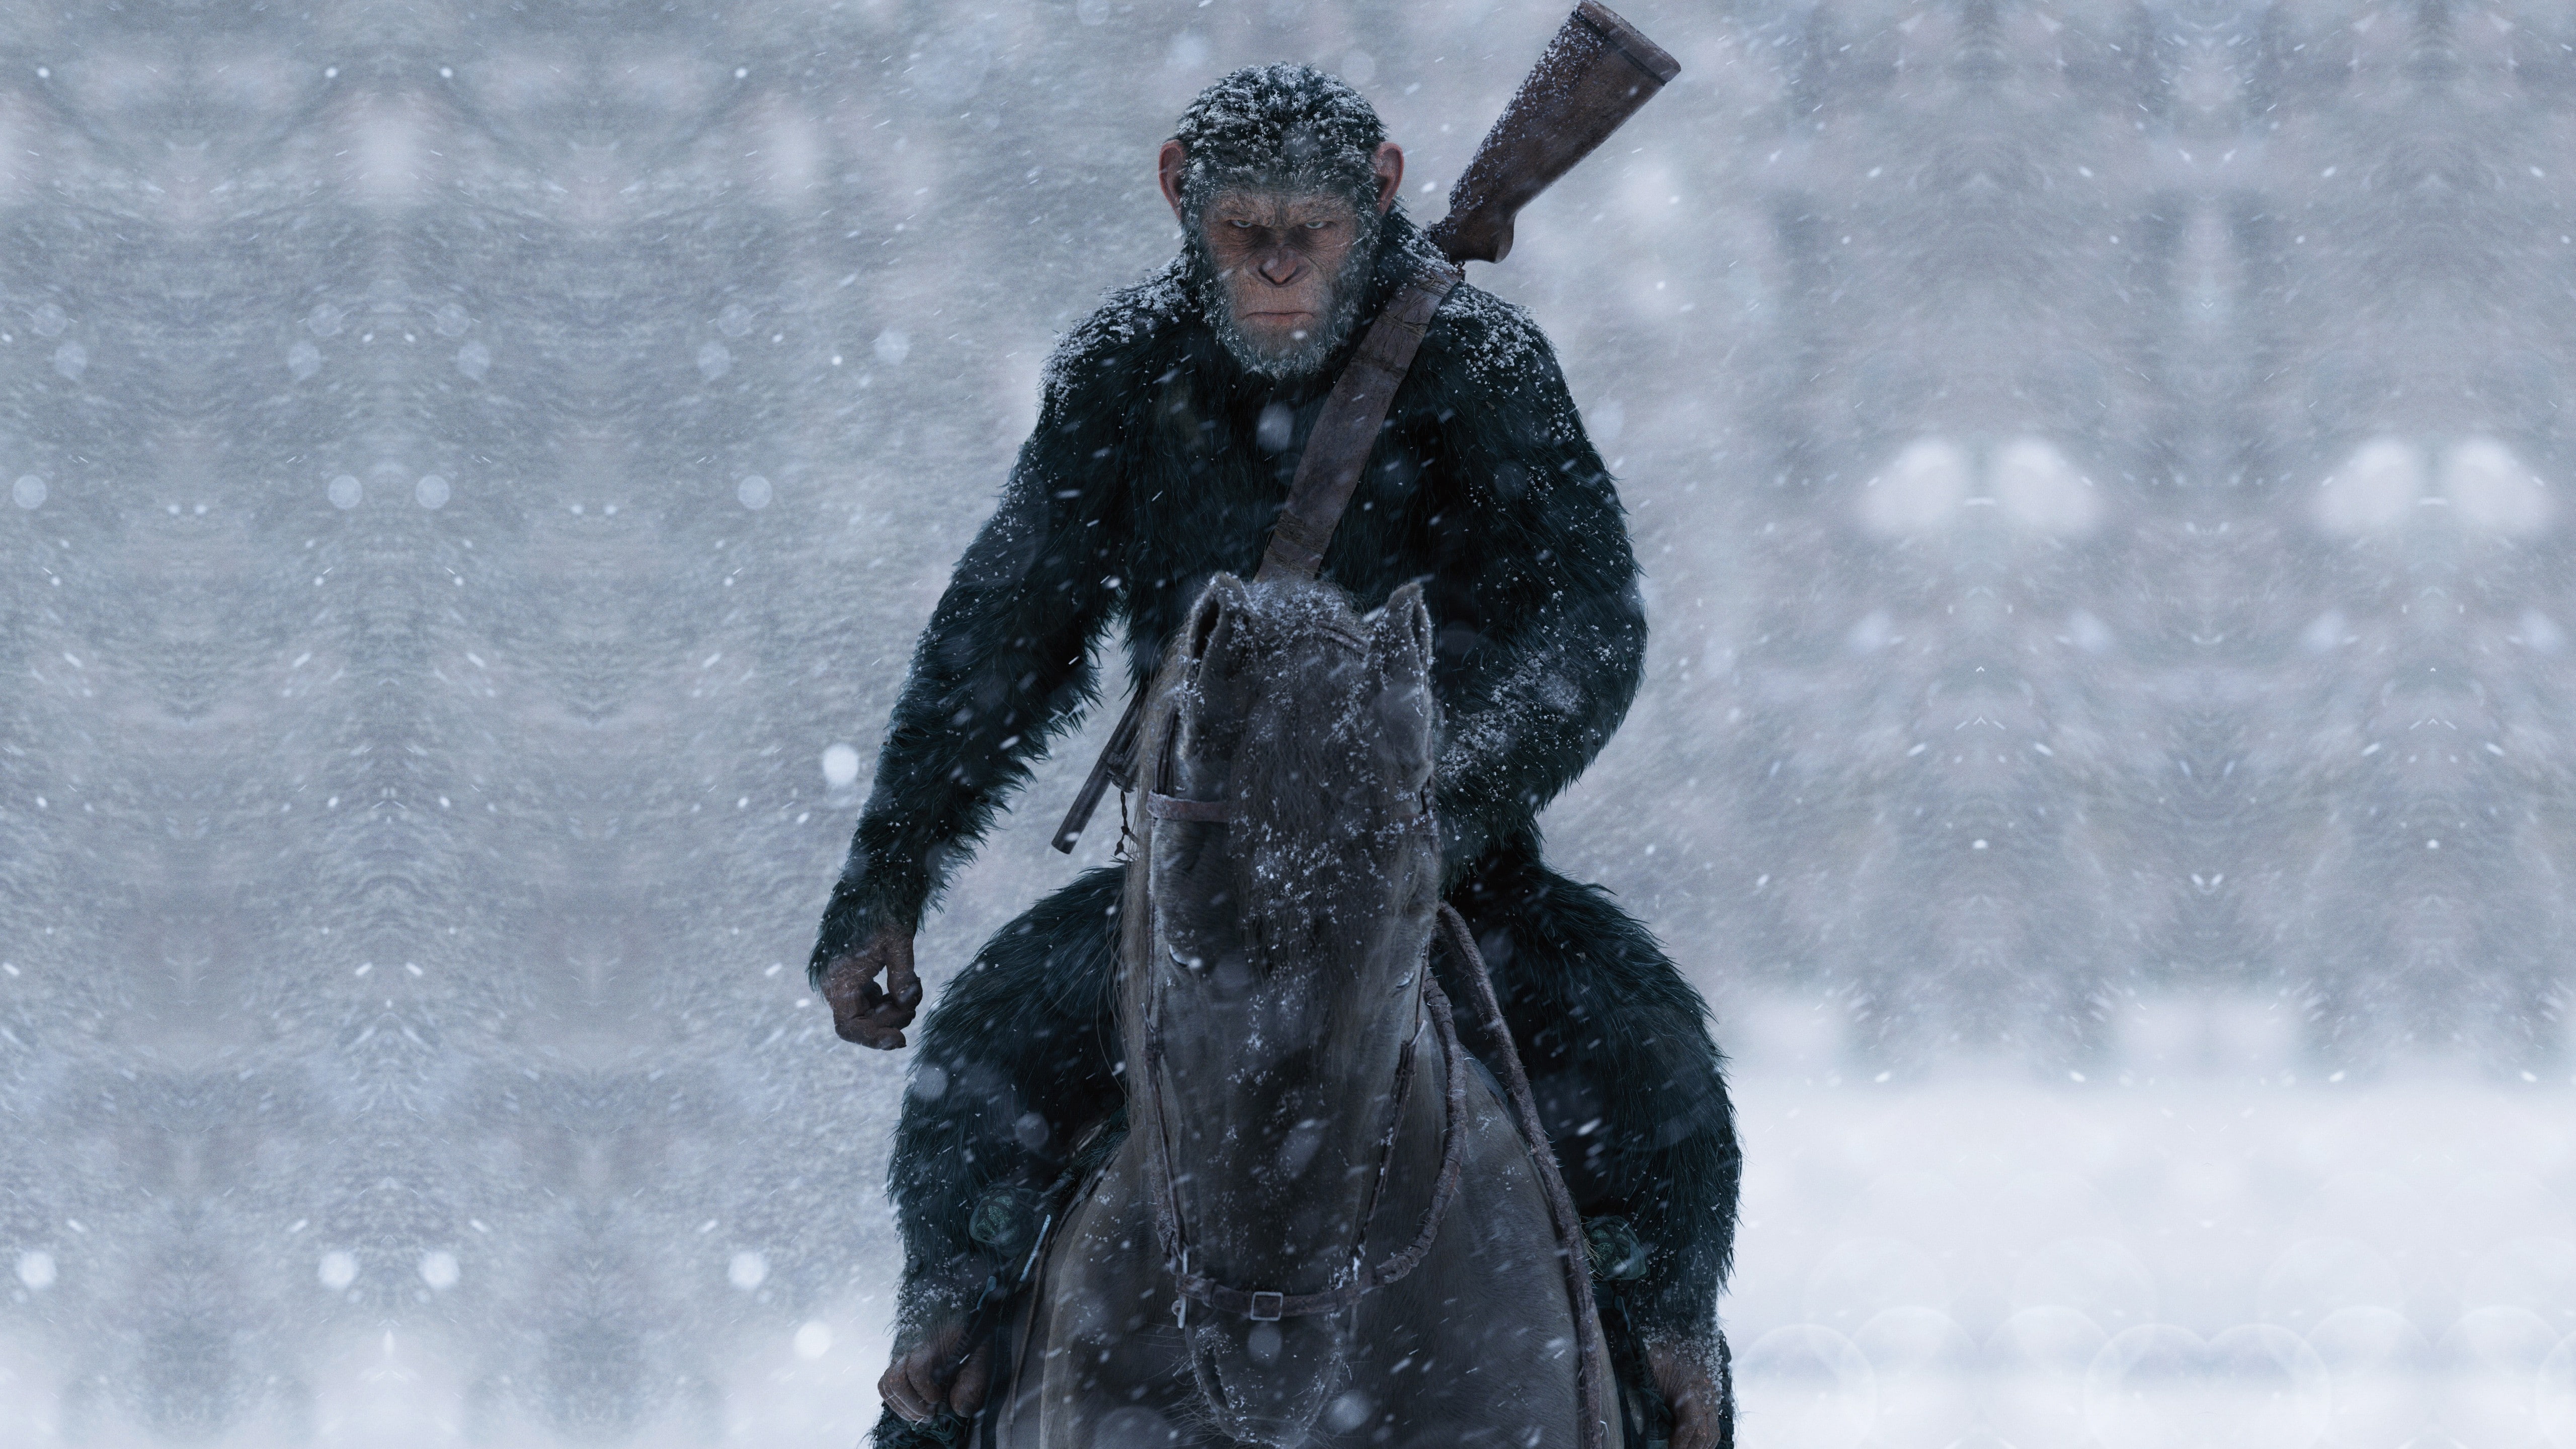 monkey riding horse with rifle, War for the Planet of the Apes